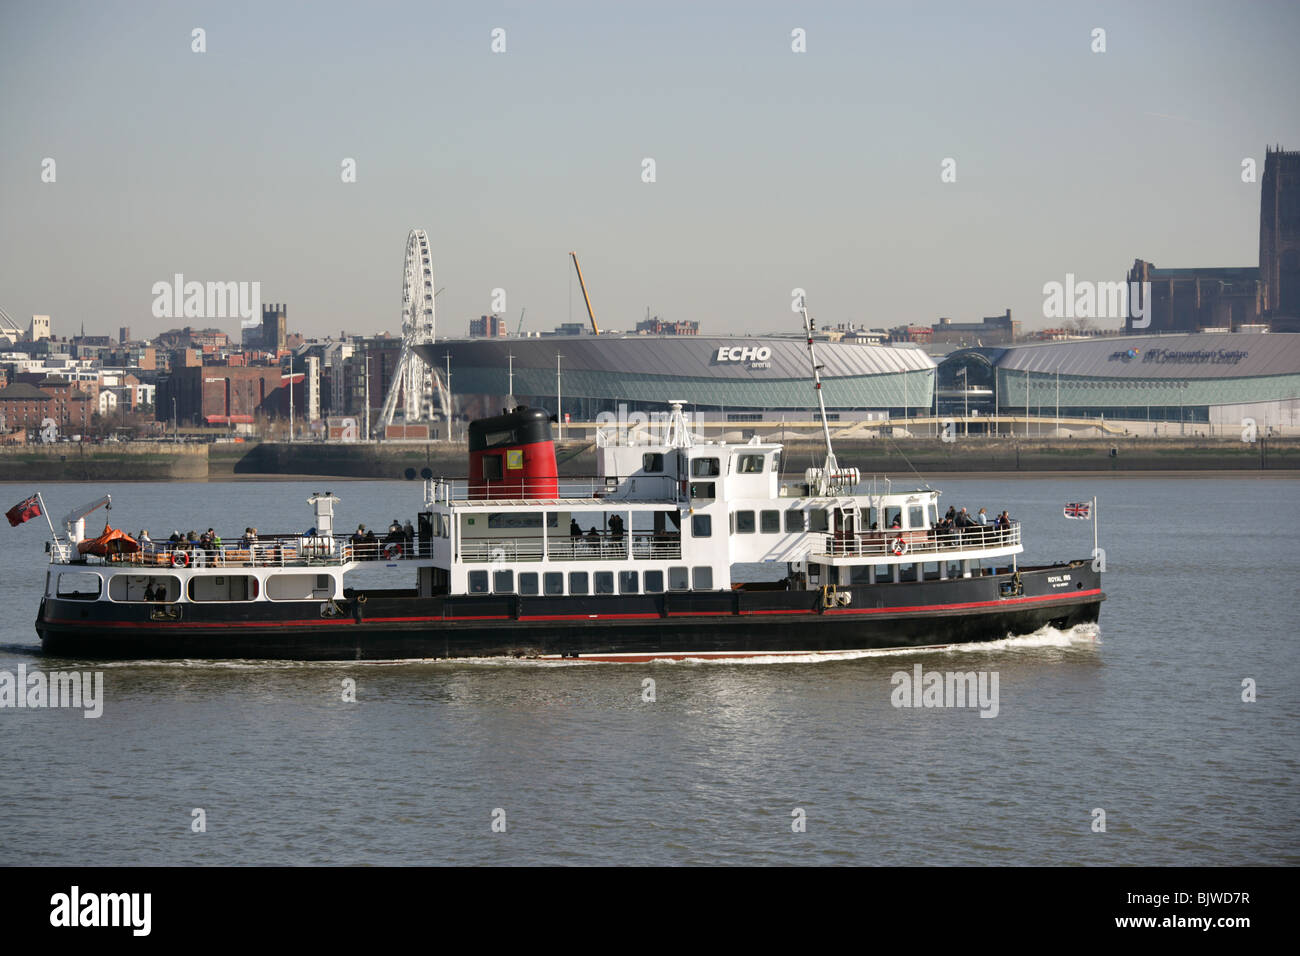 City of Liverpool, England. The Mersey Ferry MV Royal Iris crossing the River Mersey from Birkenhead Woodside Ferry Terminal. Stock Photo